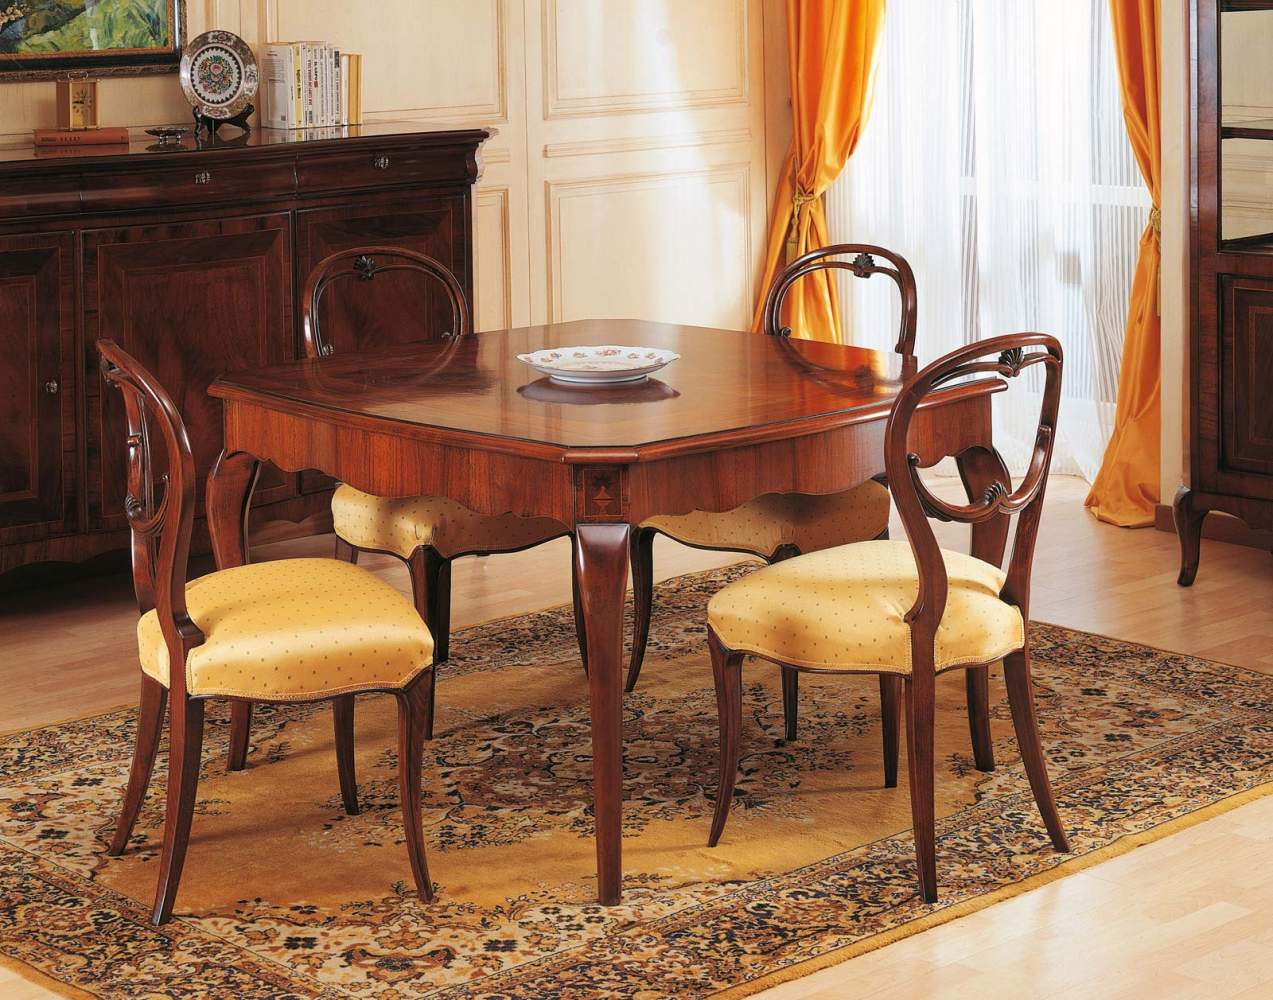 Walnut table in 19th century style